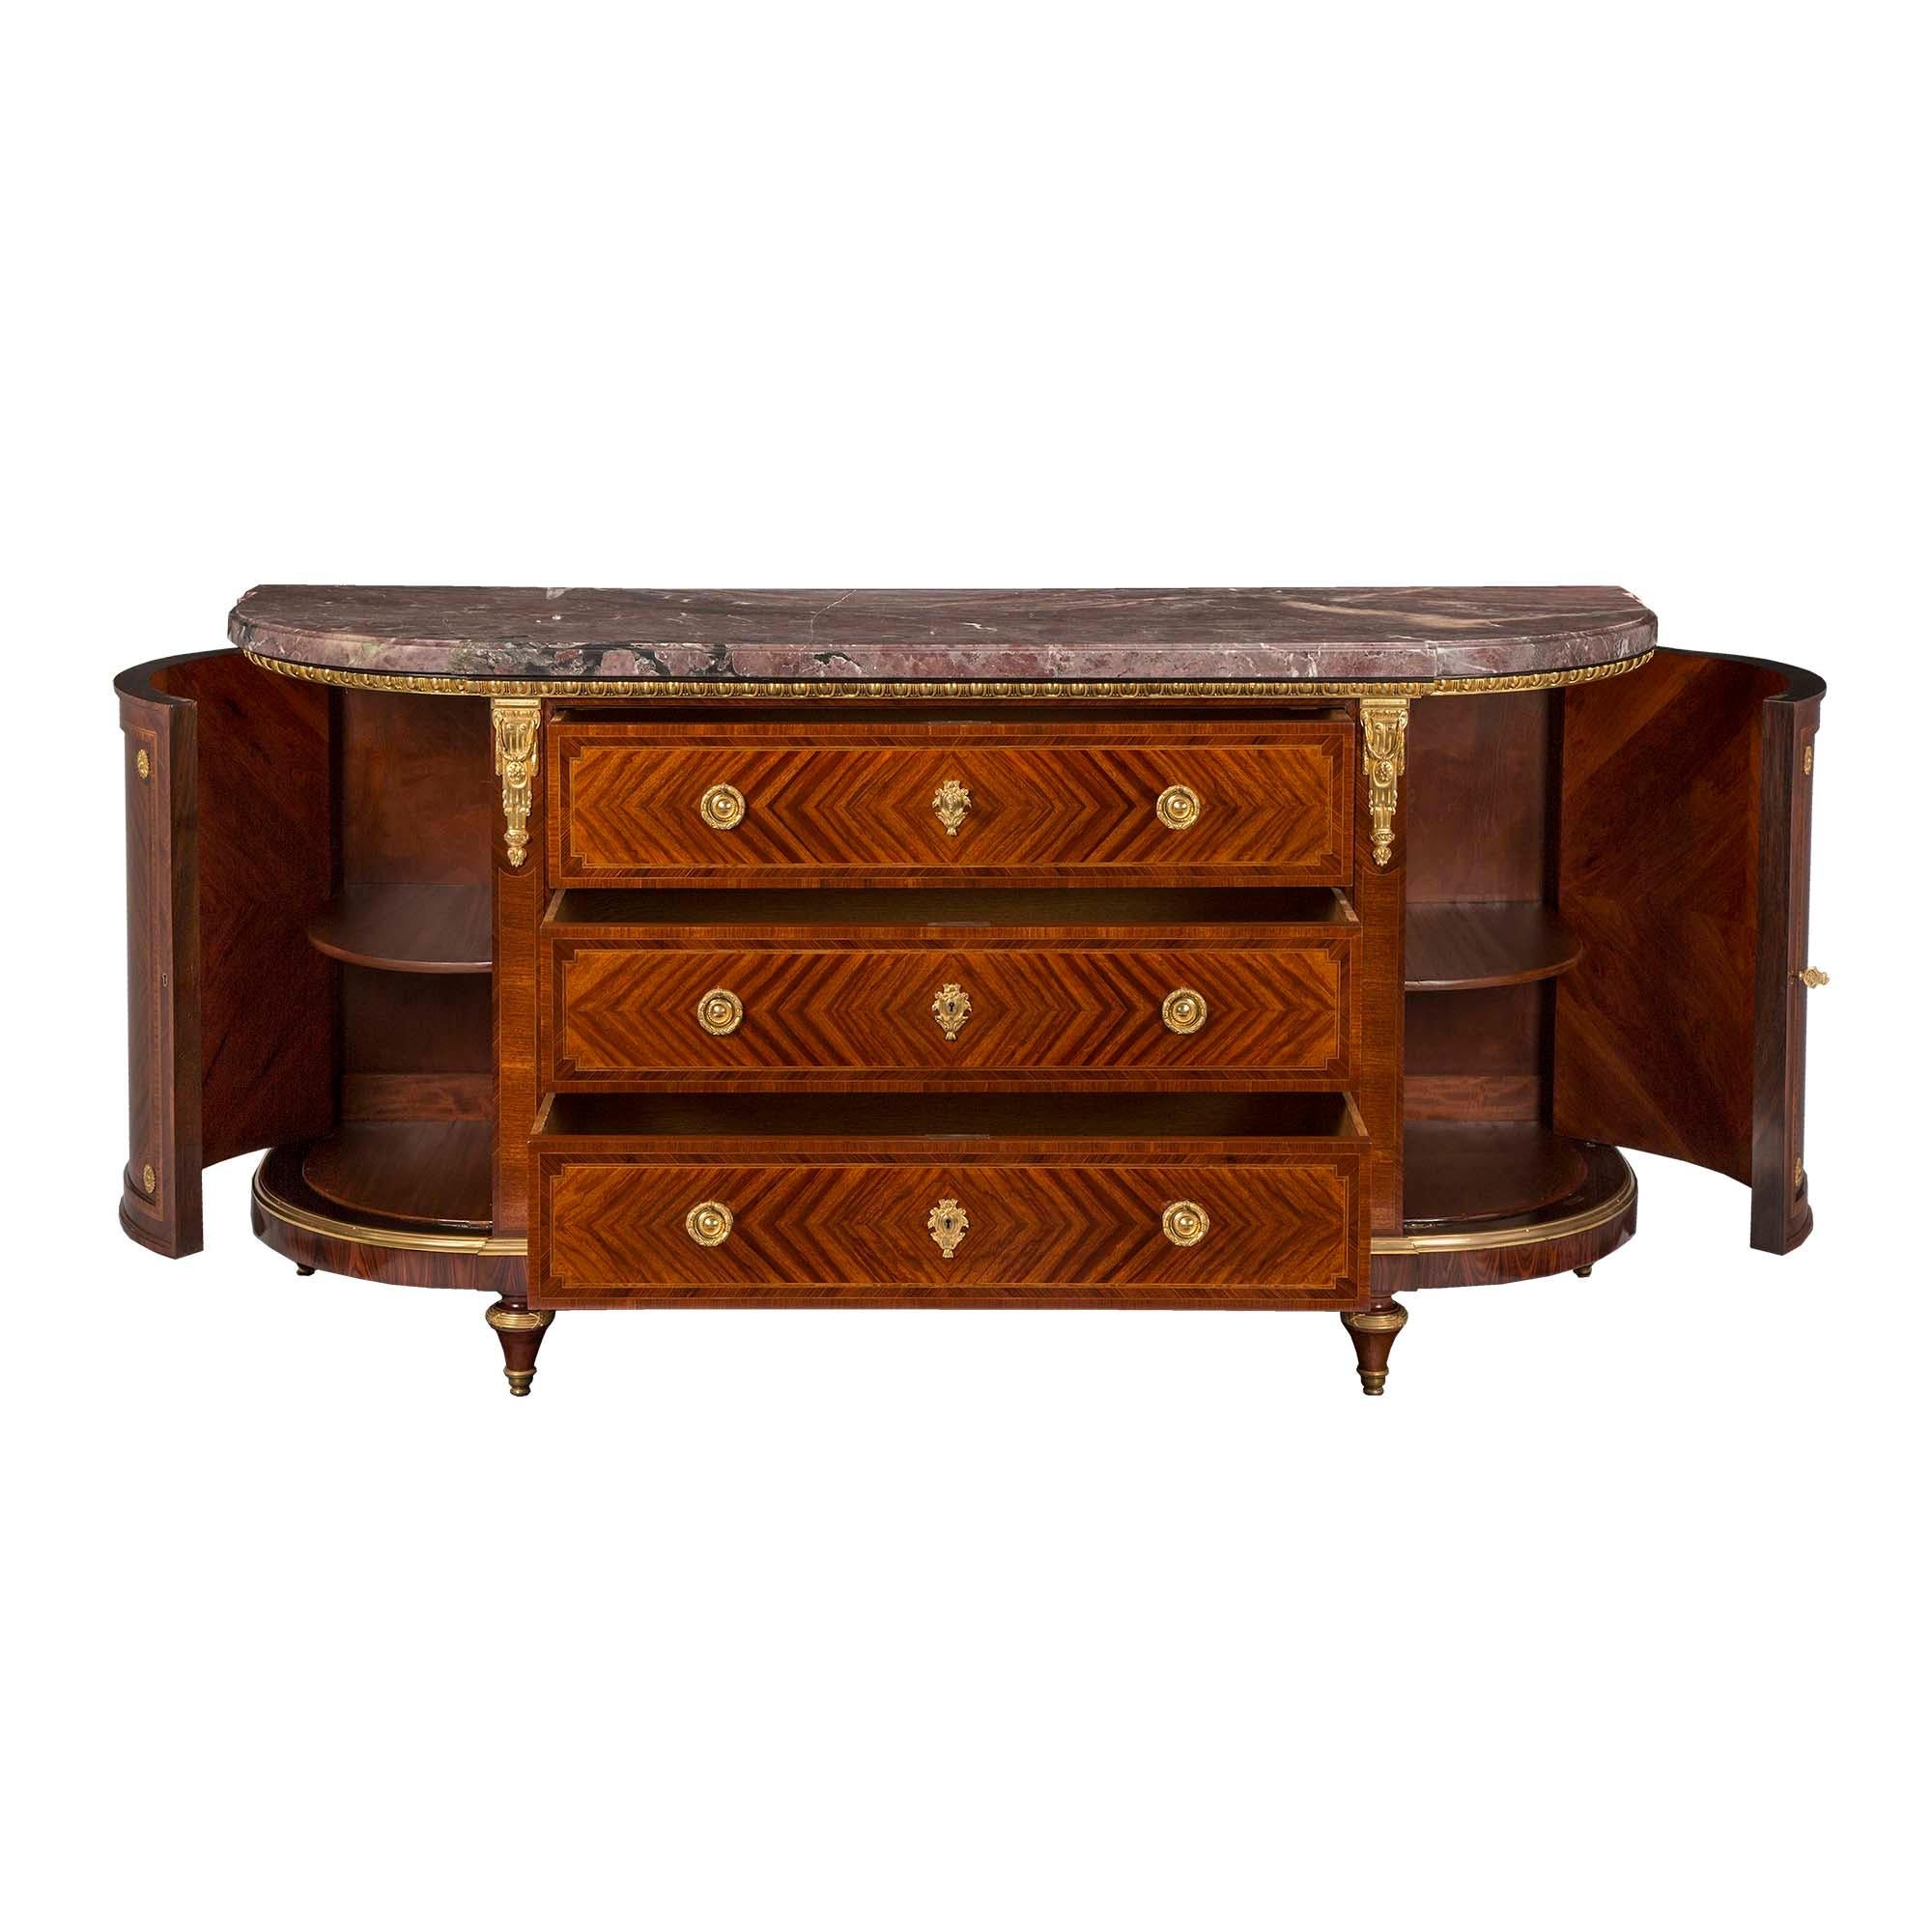 French 19th Century Louis XVI Style Kingwood, Tulipwood and Ormolu Buffet In Good Condition For Sale In West Palm Beach, FL